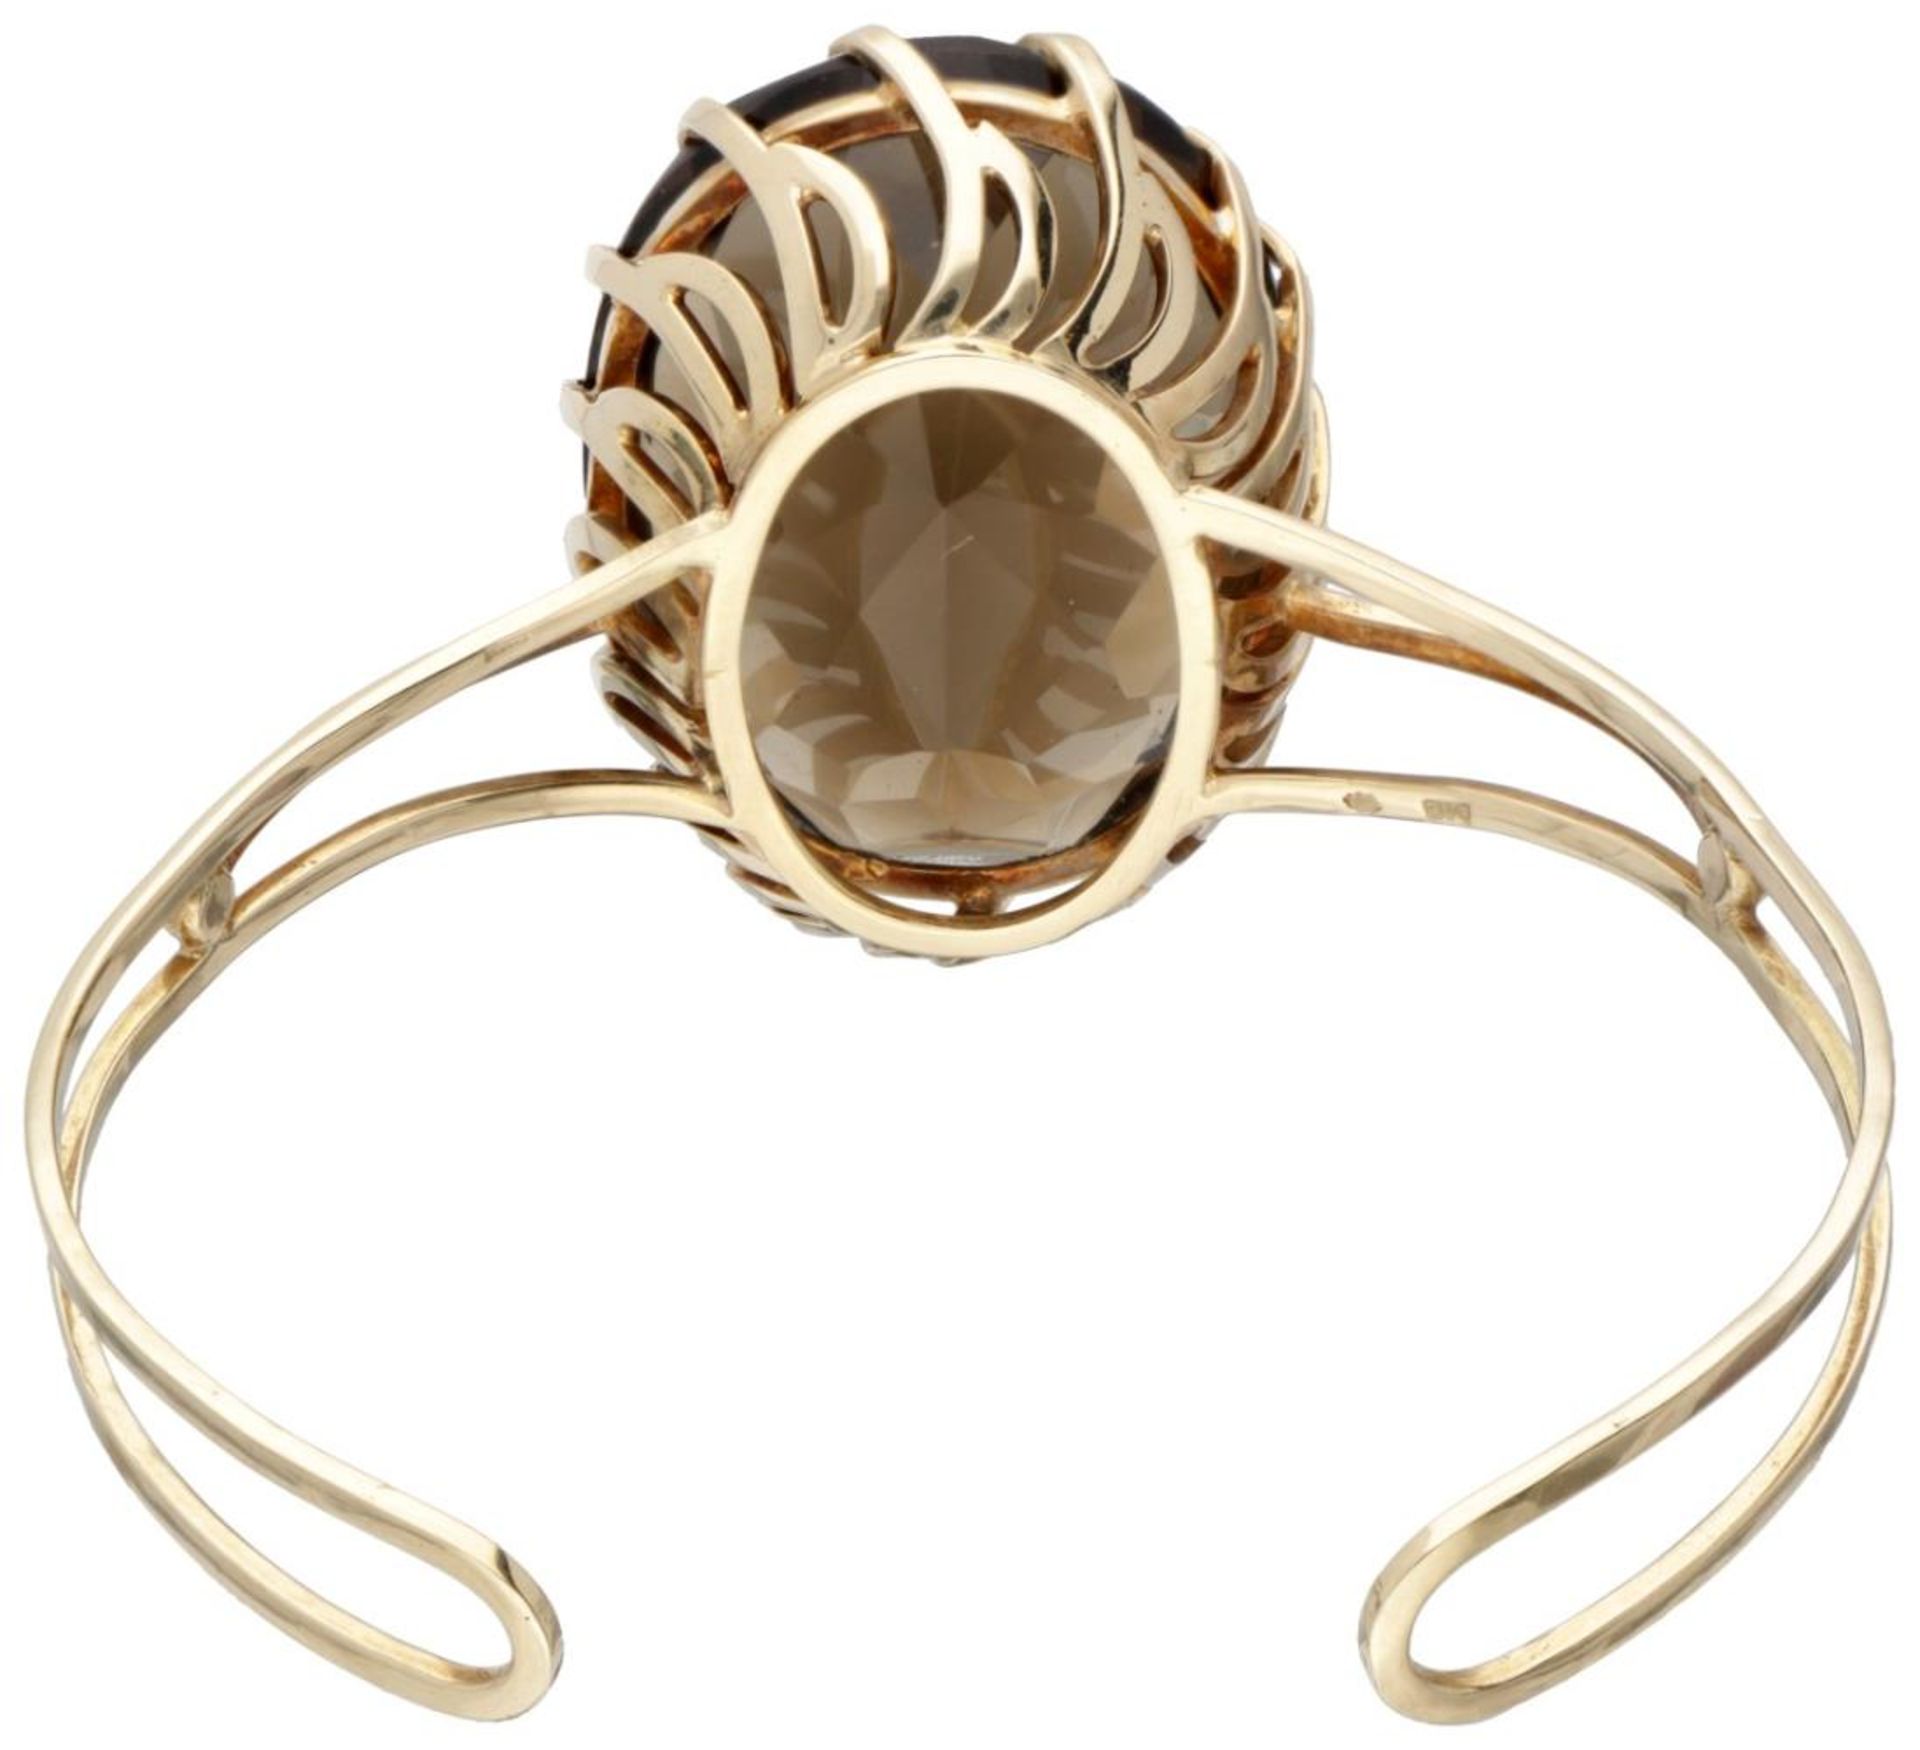 14K. Yellow gold cuff bracelet set with approx. 78.89 ct. smoky quartz. - Image 5 of 6